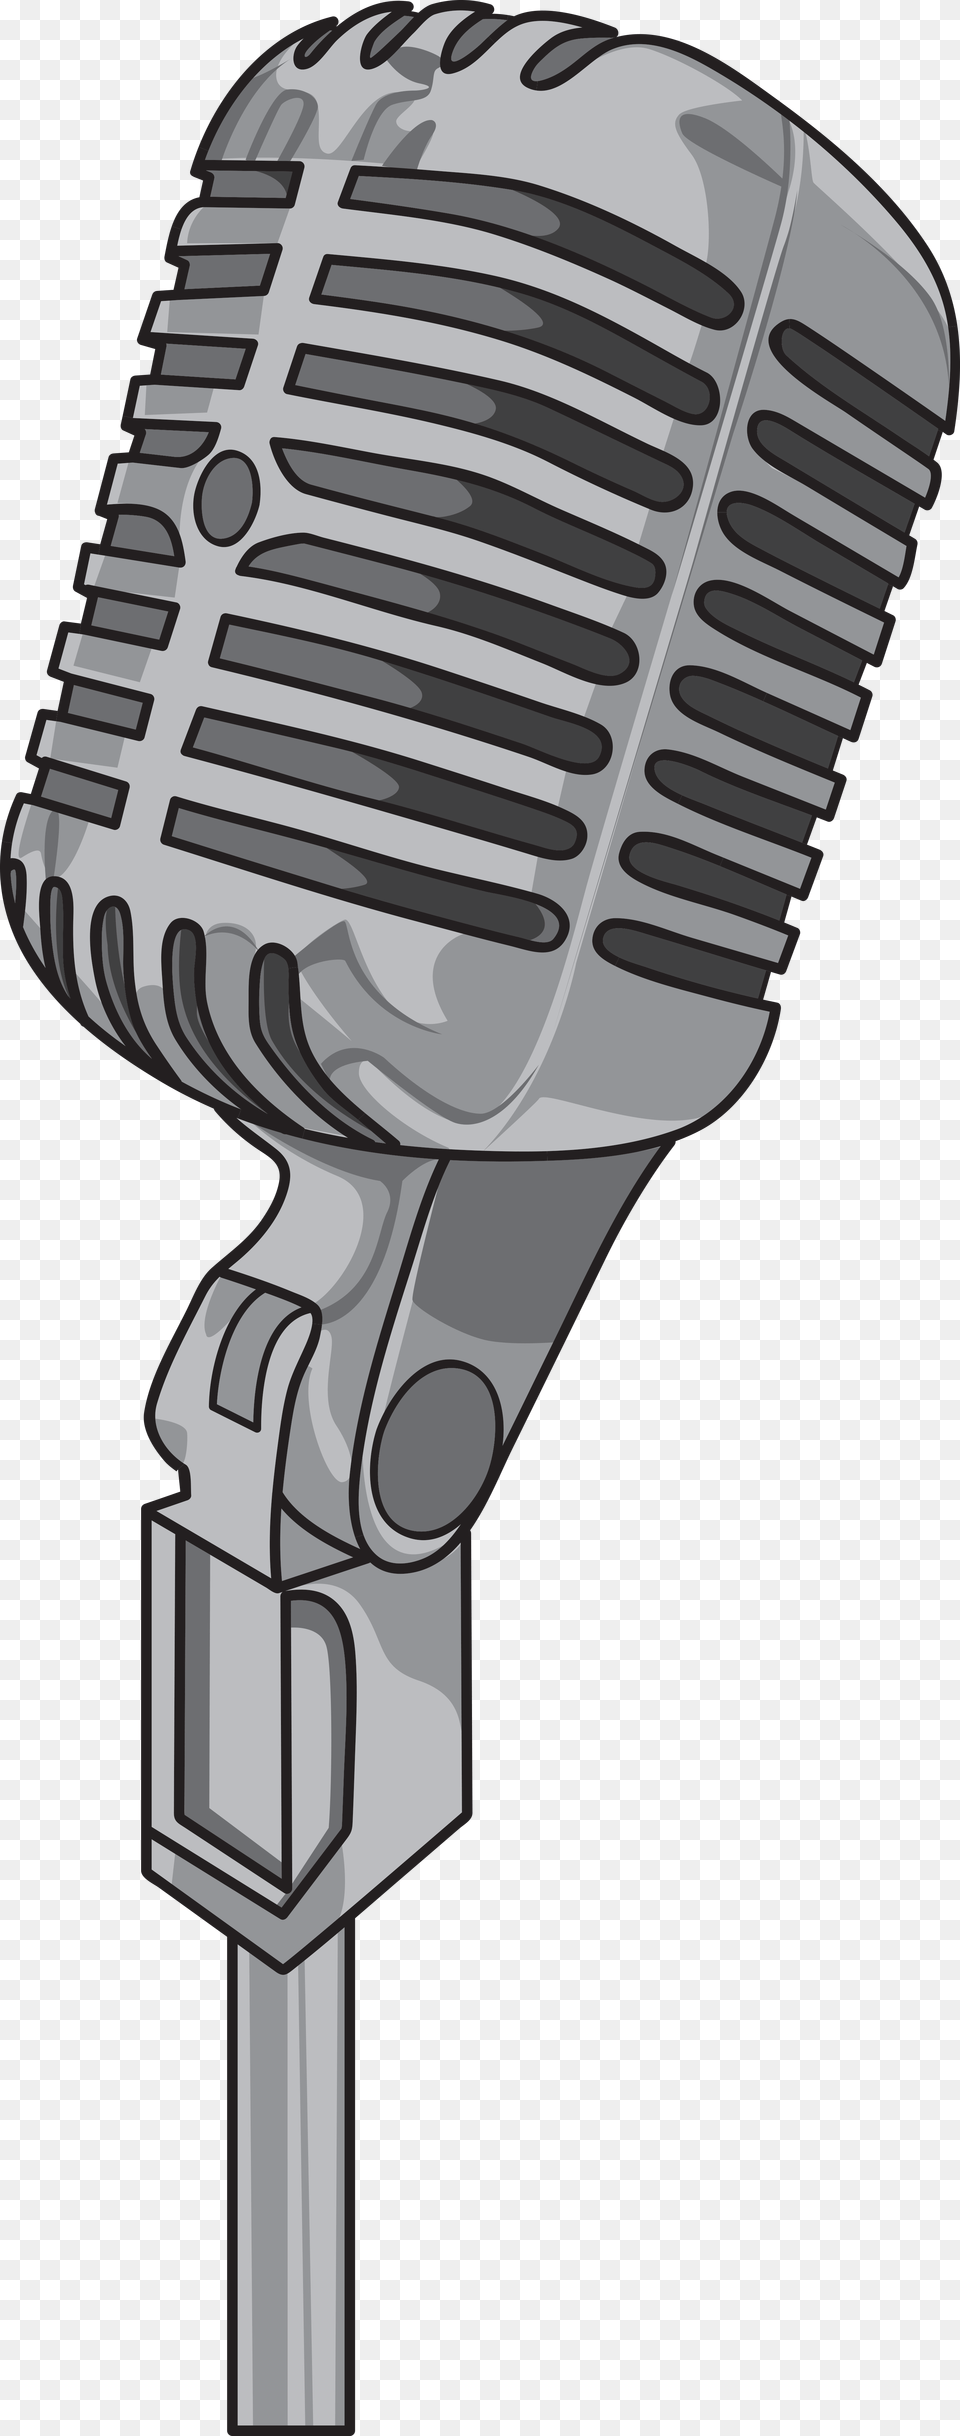 Microphone Vector Microphone Vector Transparent Microphone Vector, Electrical Device Png Image